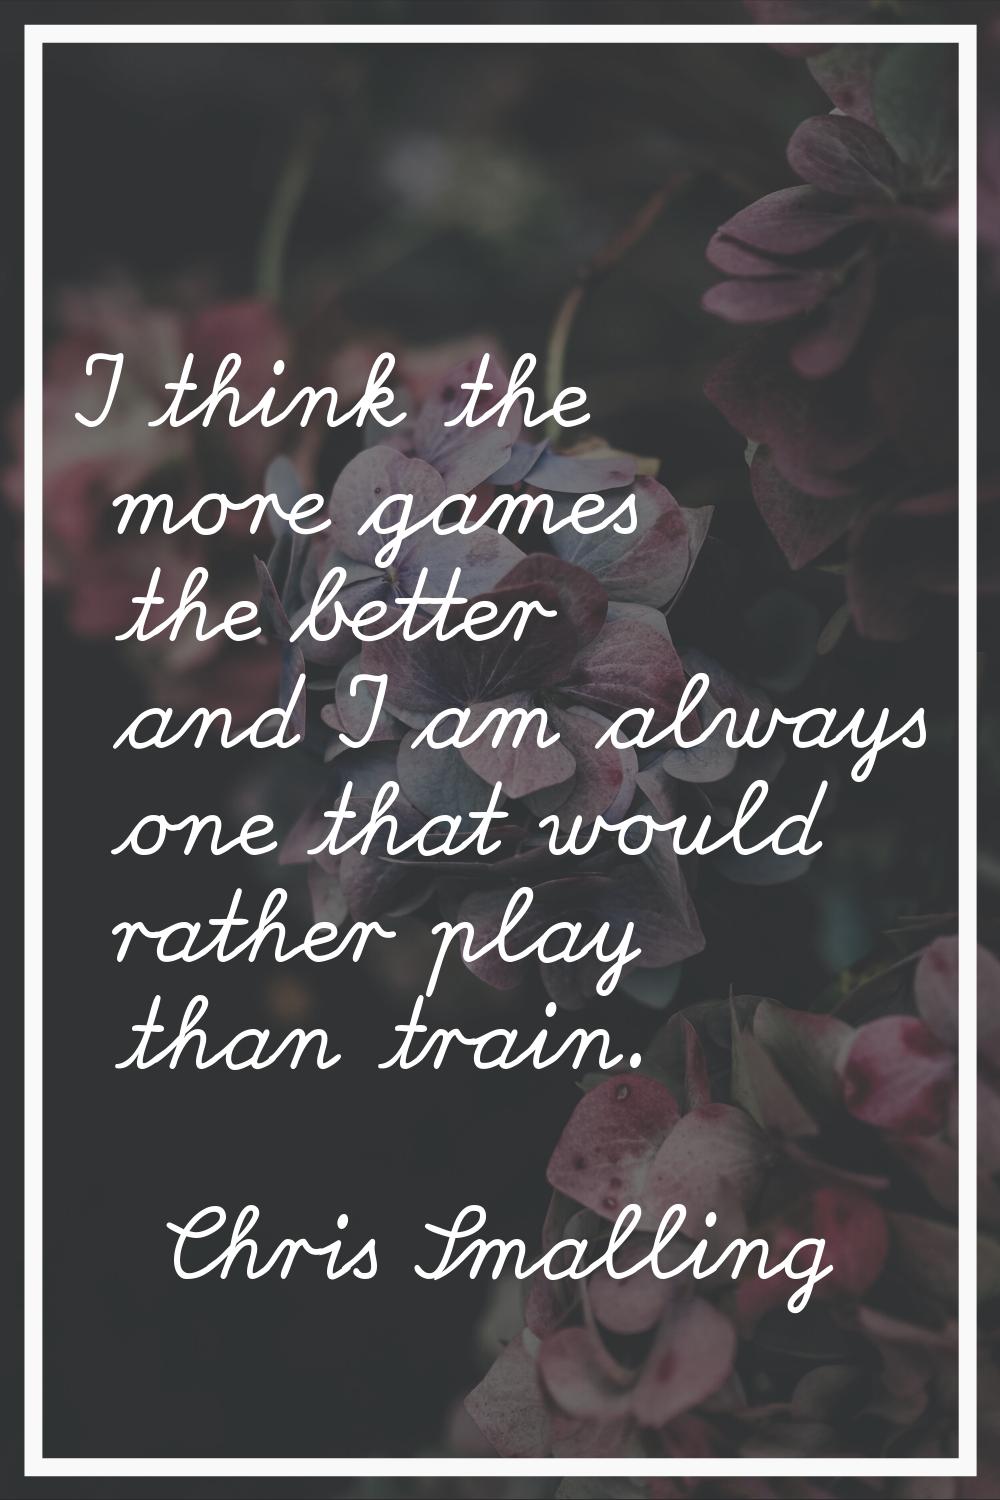 I think the more games the better and I am always one that would rather play than train.